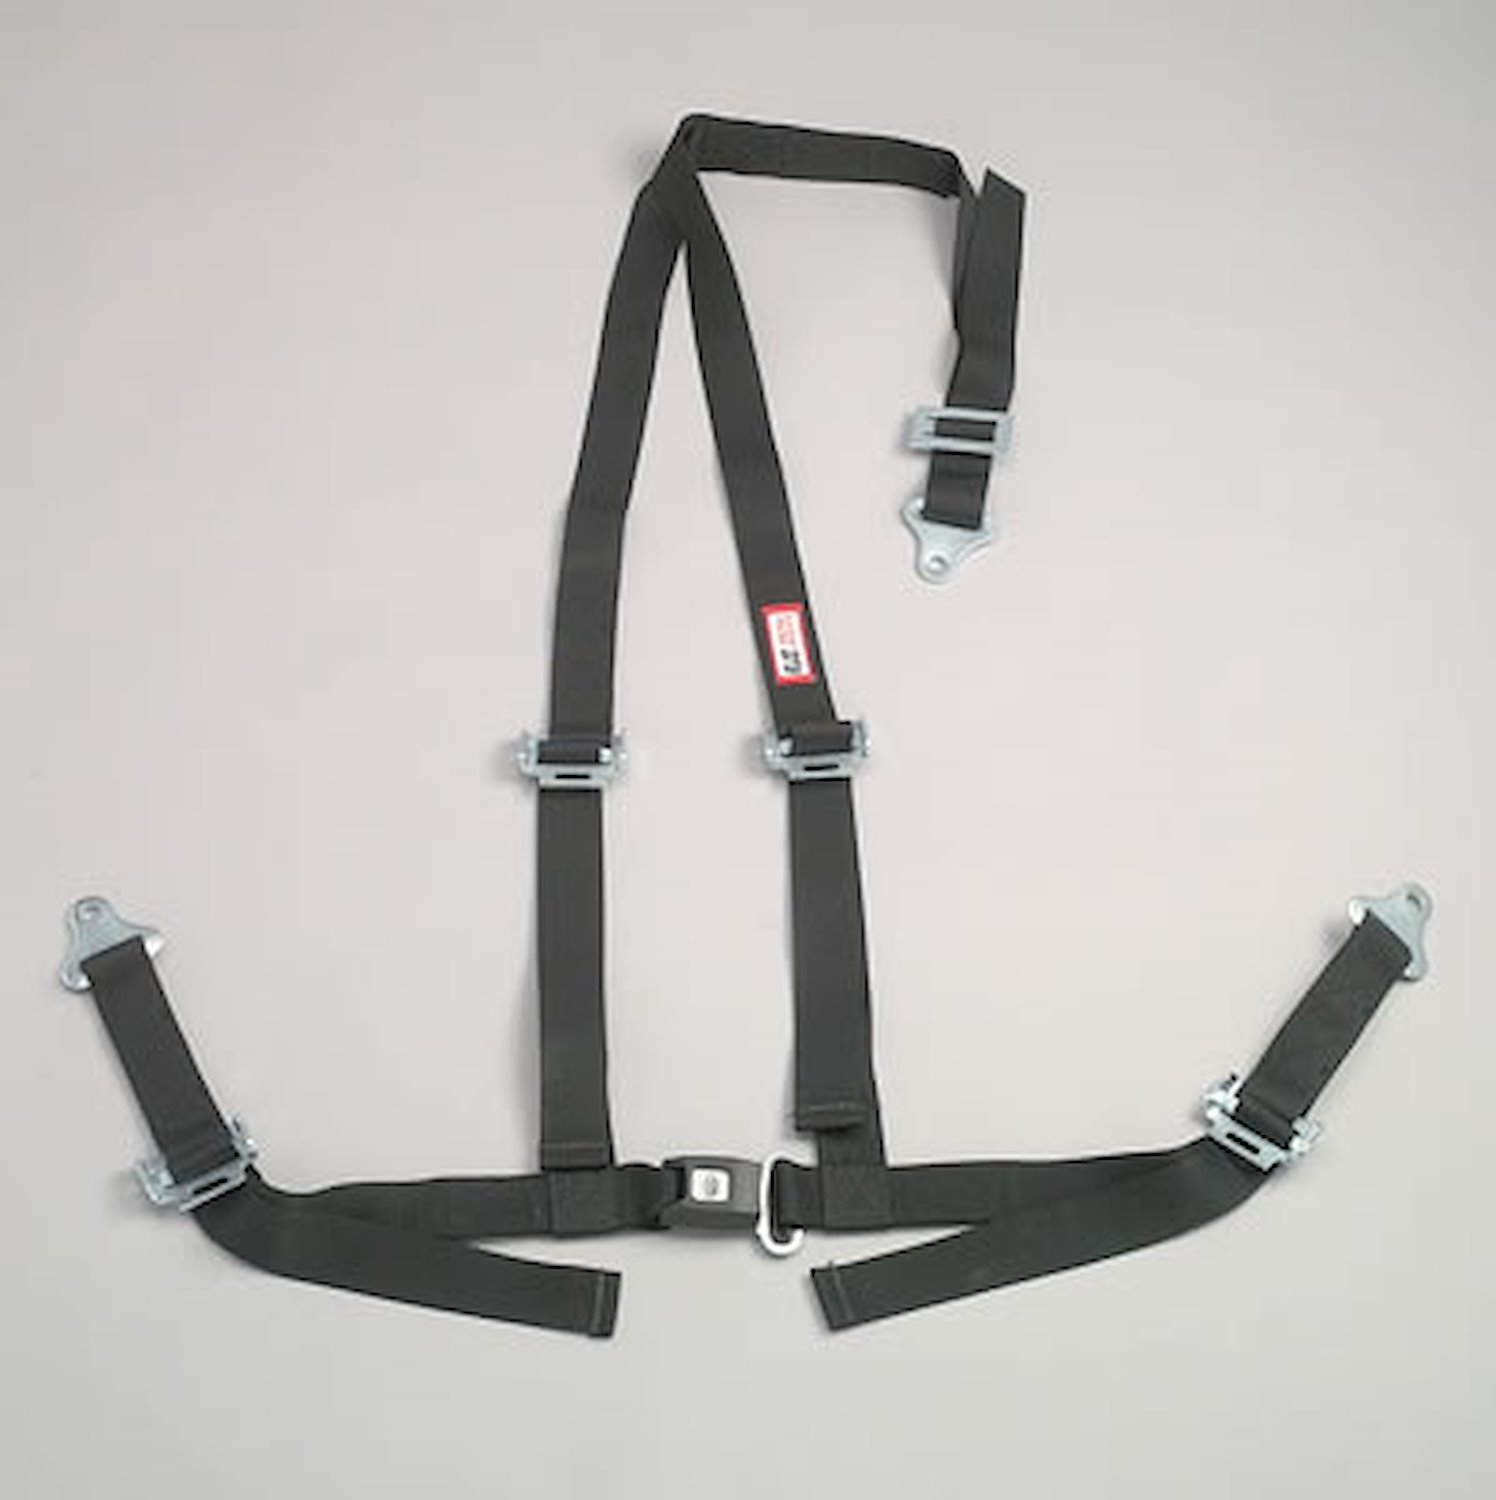 NON-SFI B&T HARNESS 2 PULL DOWN Lap Belt 2 S. H. Individual ROLL BAR Mount ALL WRAP ENDS RED